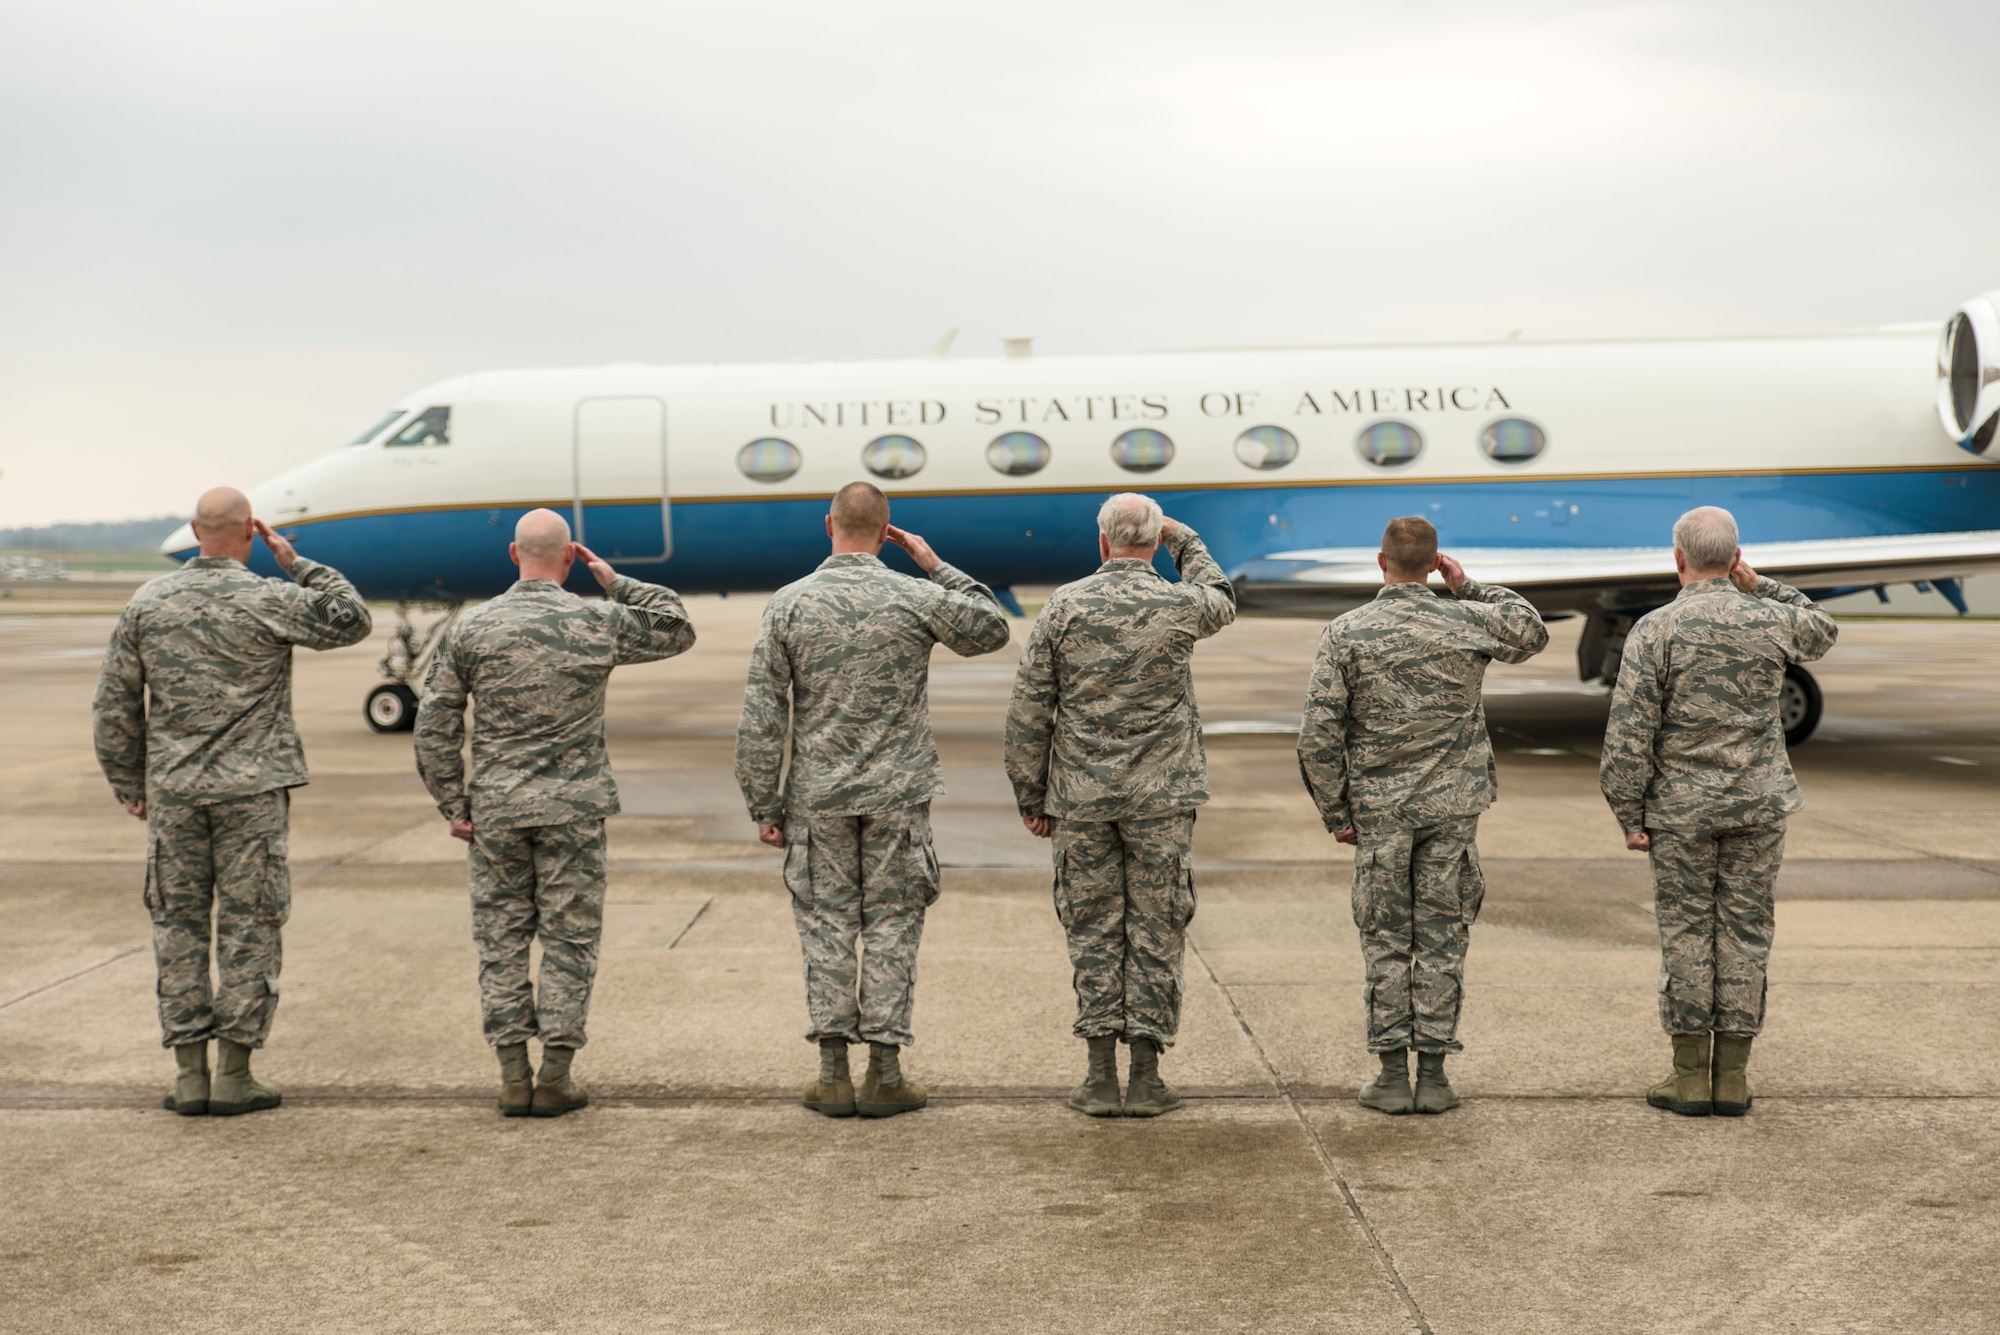 188th Wing and Arkansas Air National Guard leadership salute Secretary of the Air Force, Heather Wilson, as she departs Ebbing Air National Guard Base, Fort Smith, Ark., Mar. 26 , 2018.  Wilson’s visit to the 188th Wing marks her first tour of the wing's missions since becoming the SECAF. (U.S. Air National Guard photo by Senior Airman Matthew Matlock)